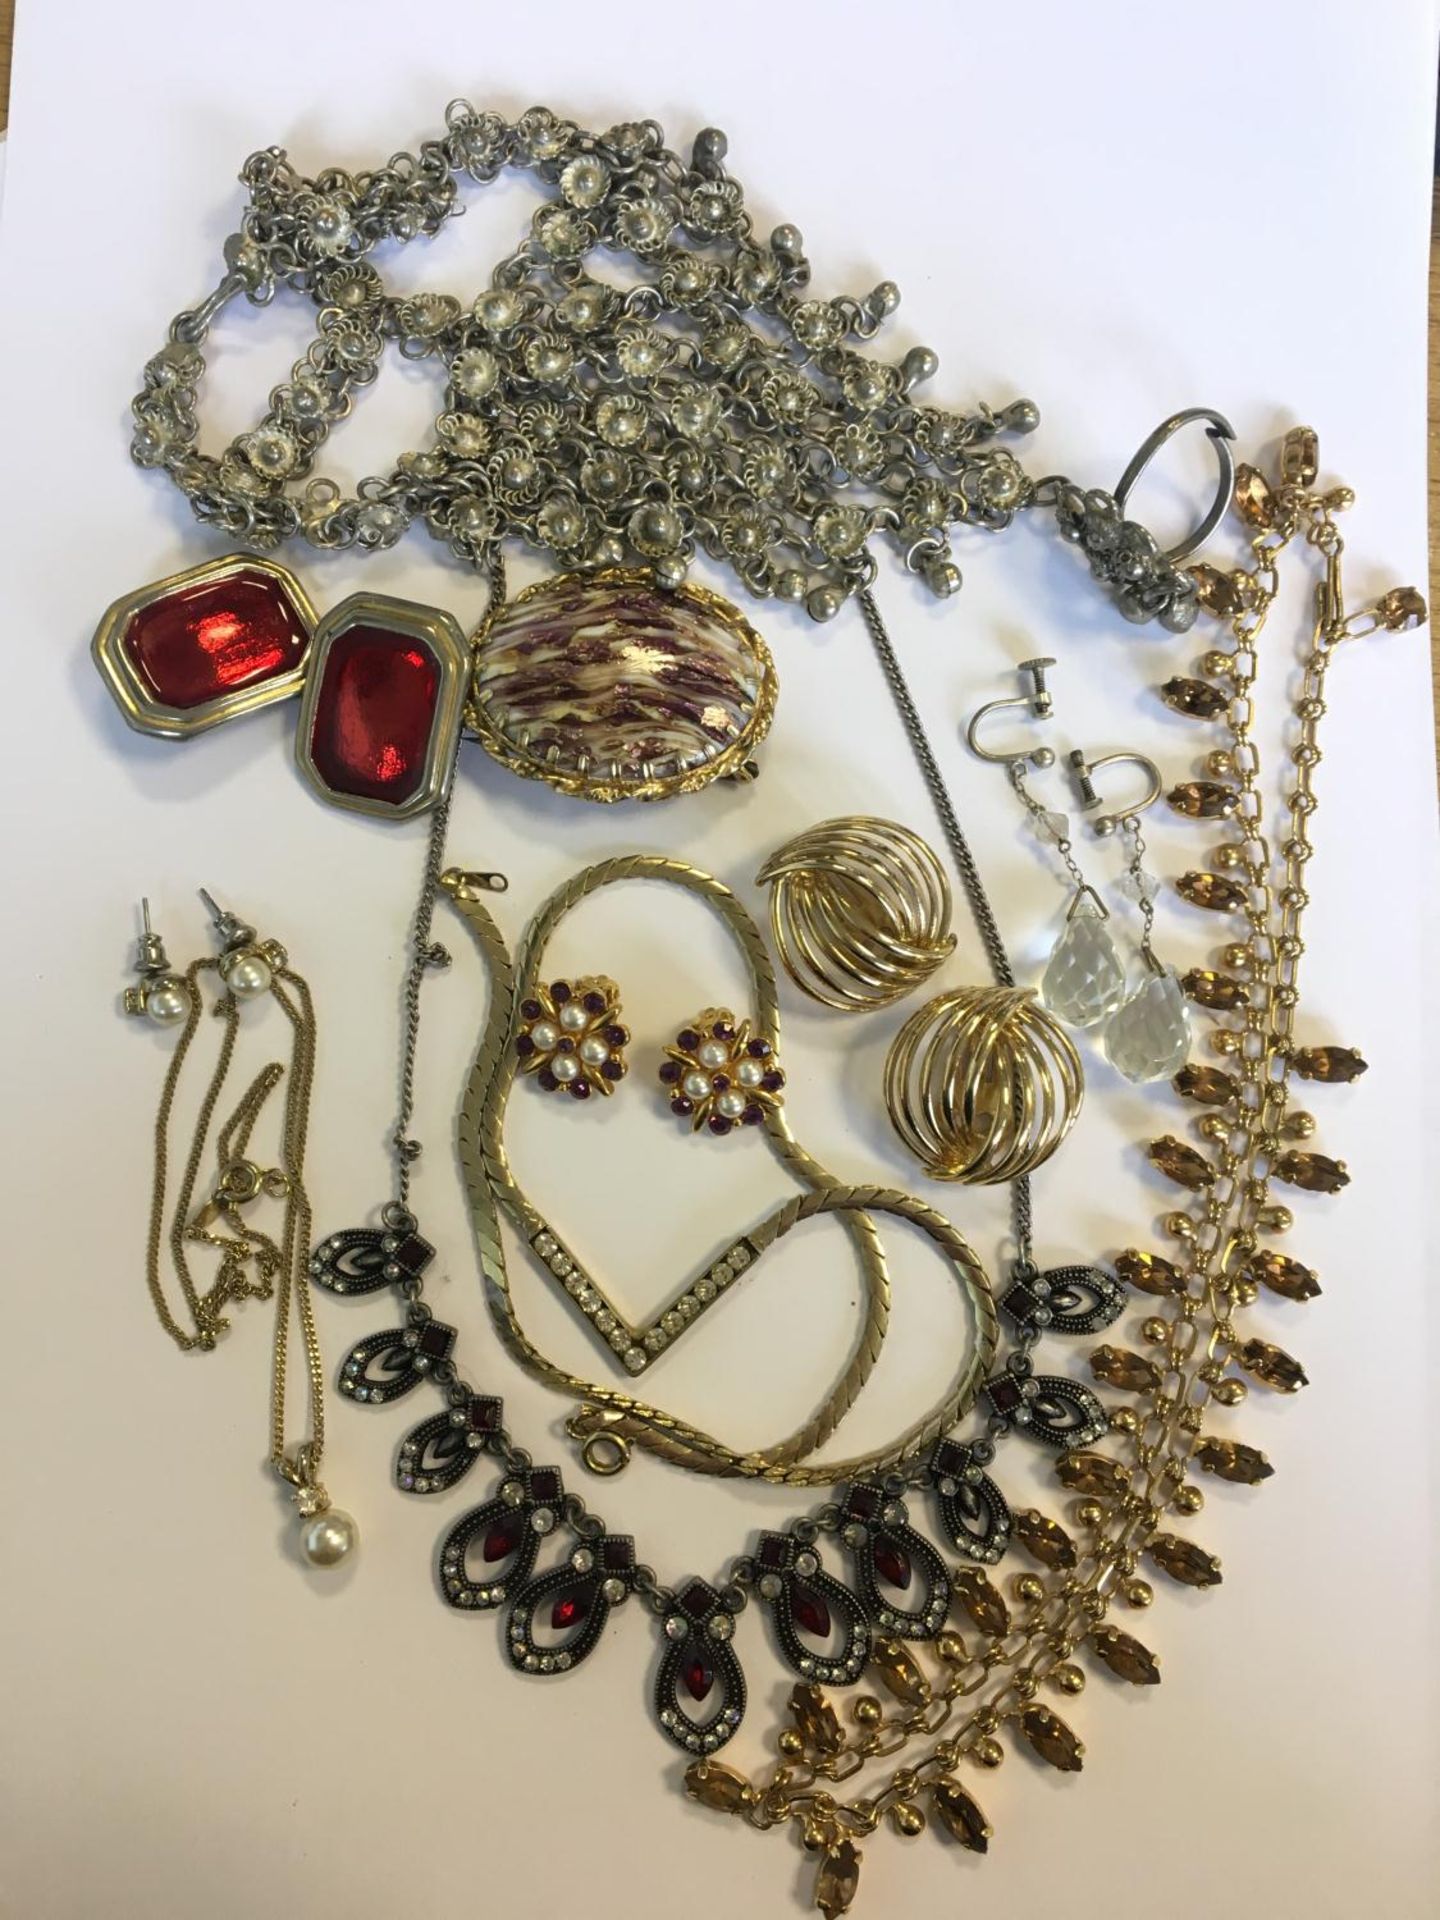 Assorted vintage ladies dress costume jewellery to include various clip on earrings, necklaces, a